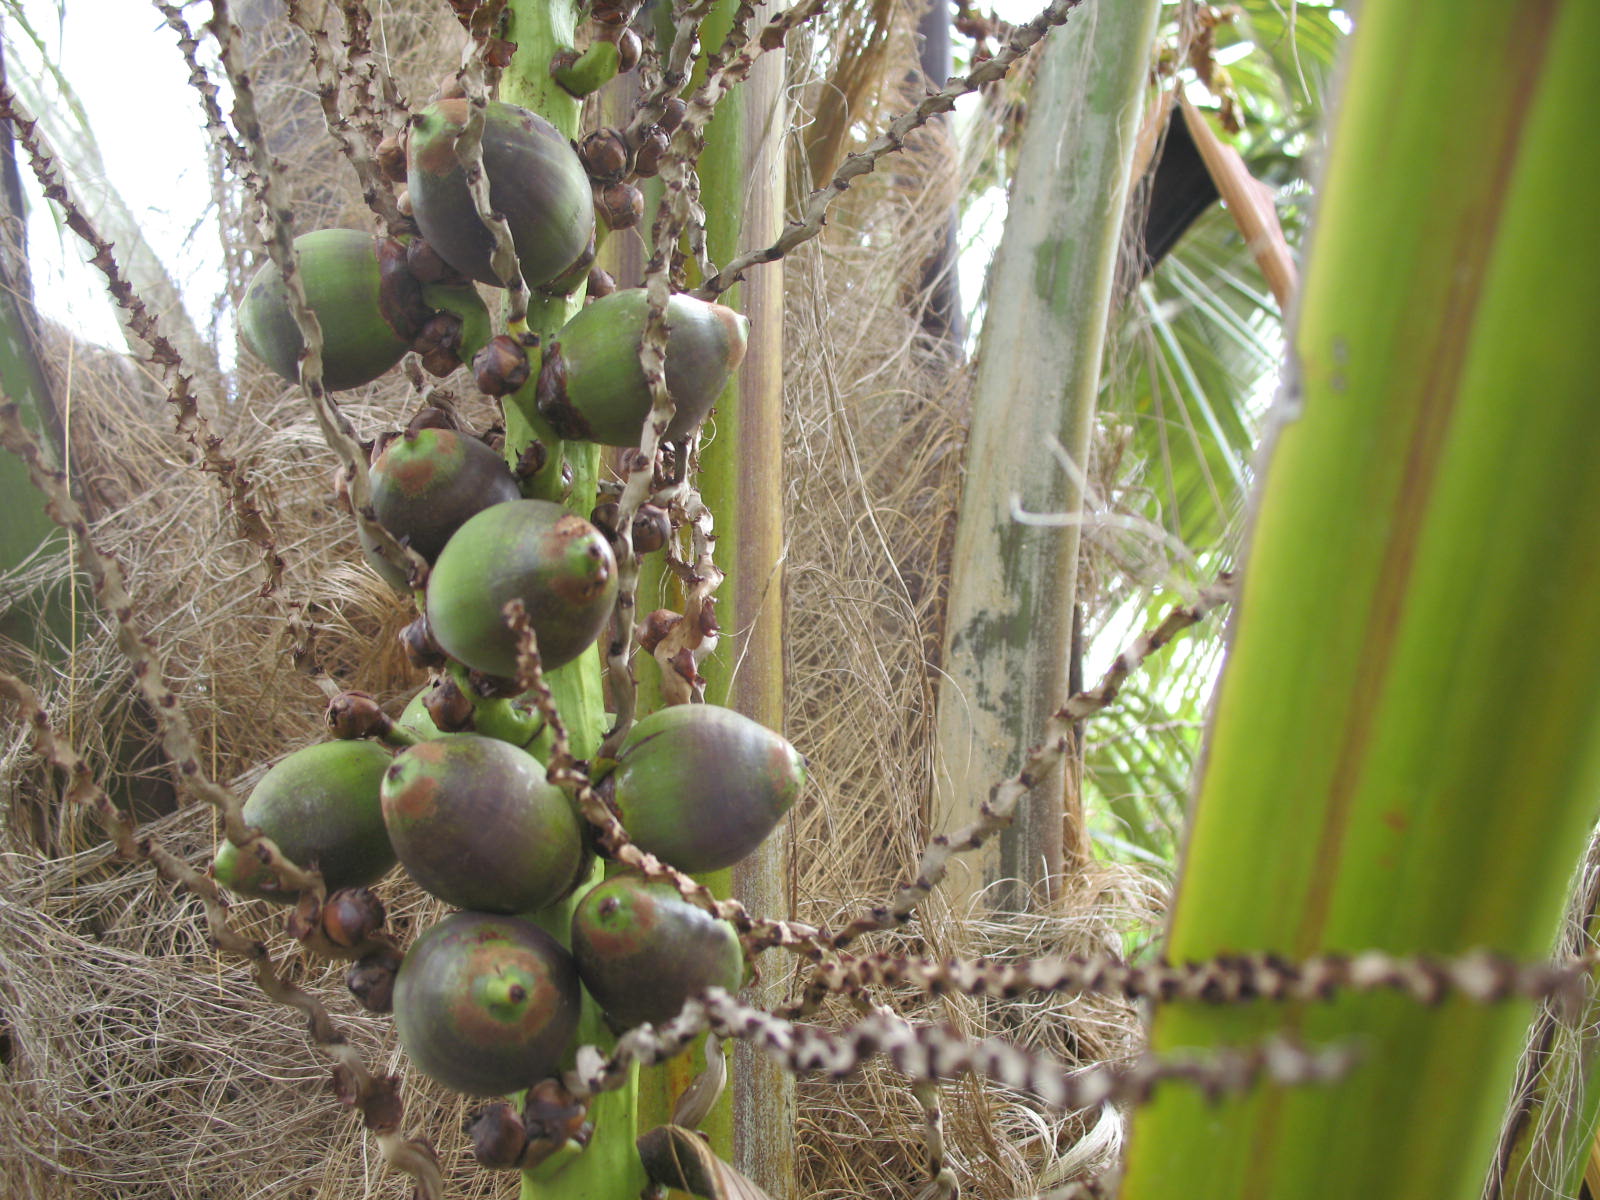 Quito palm in seed